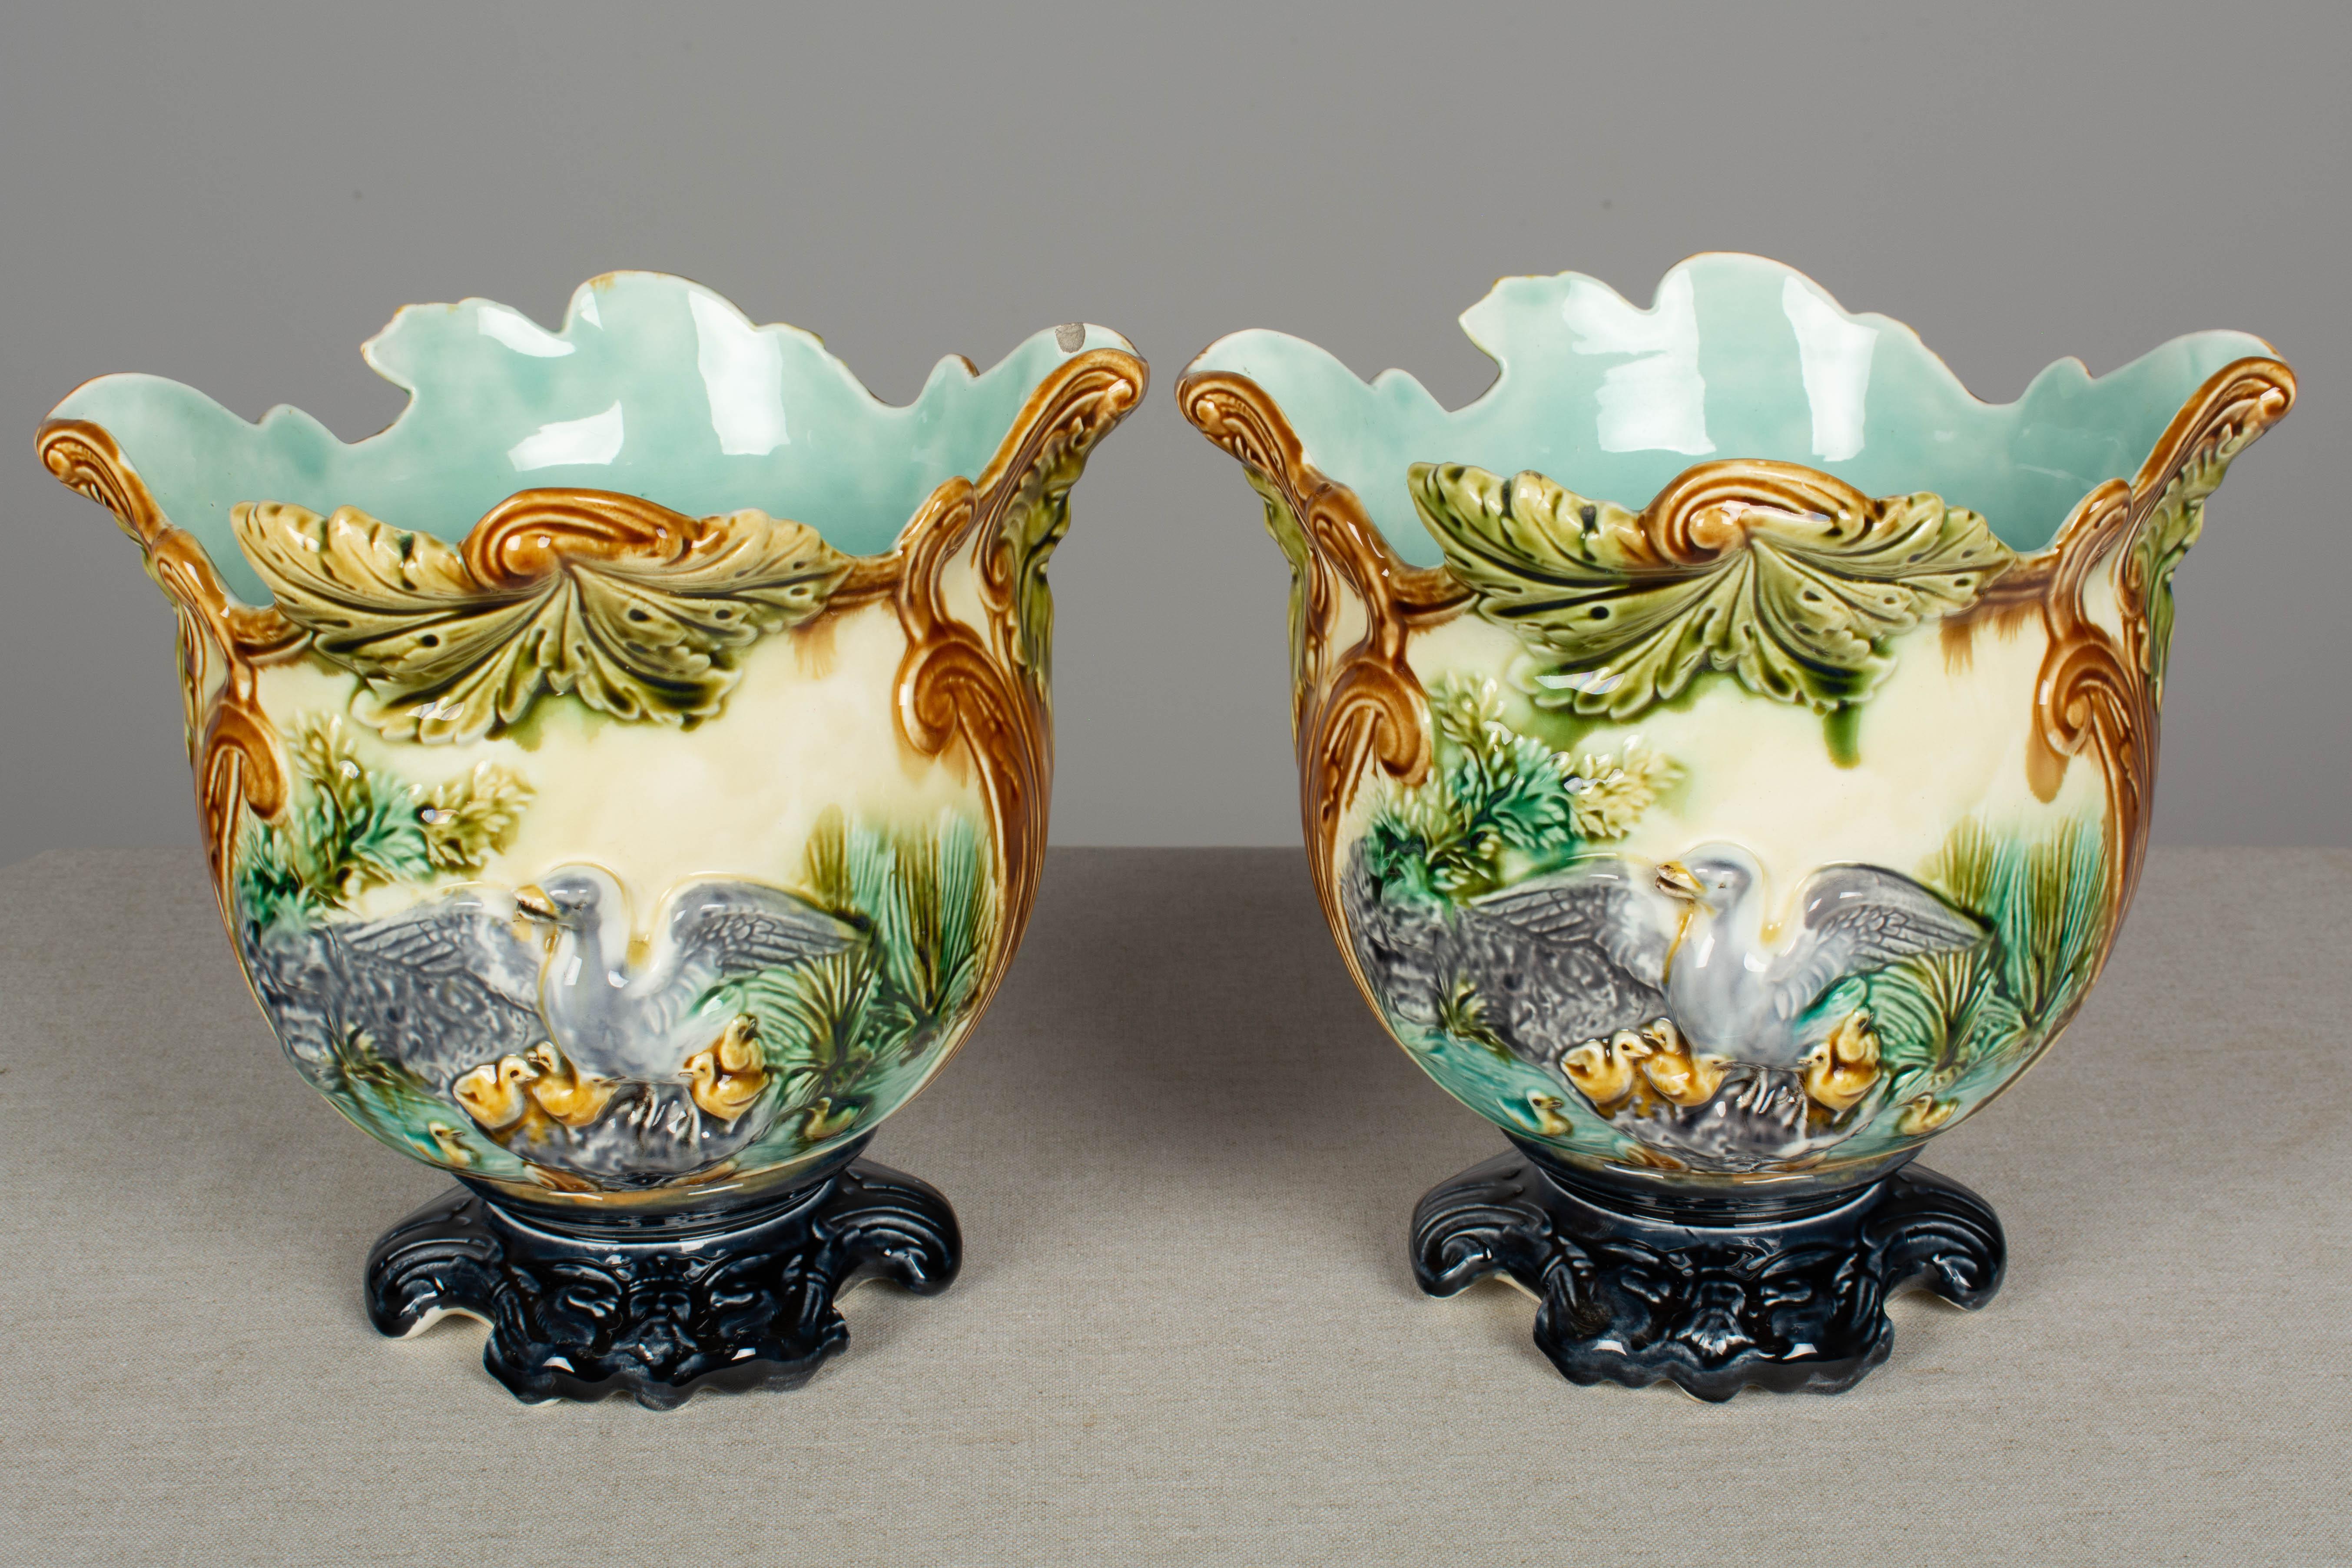 A pair of French Majolica cache pots, or planters, each depicting a duck with wings outstretched over a family of ducklings. Rich coloring of green, brown, ocher and grey with aqua interior and dark blue base. Minor chip to glaze of the interior of